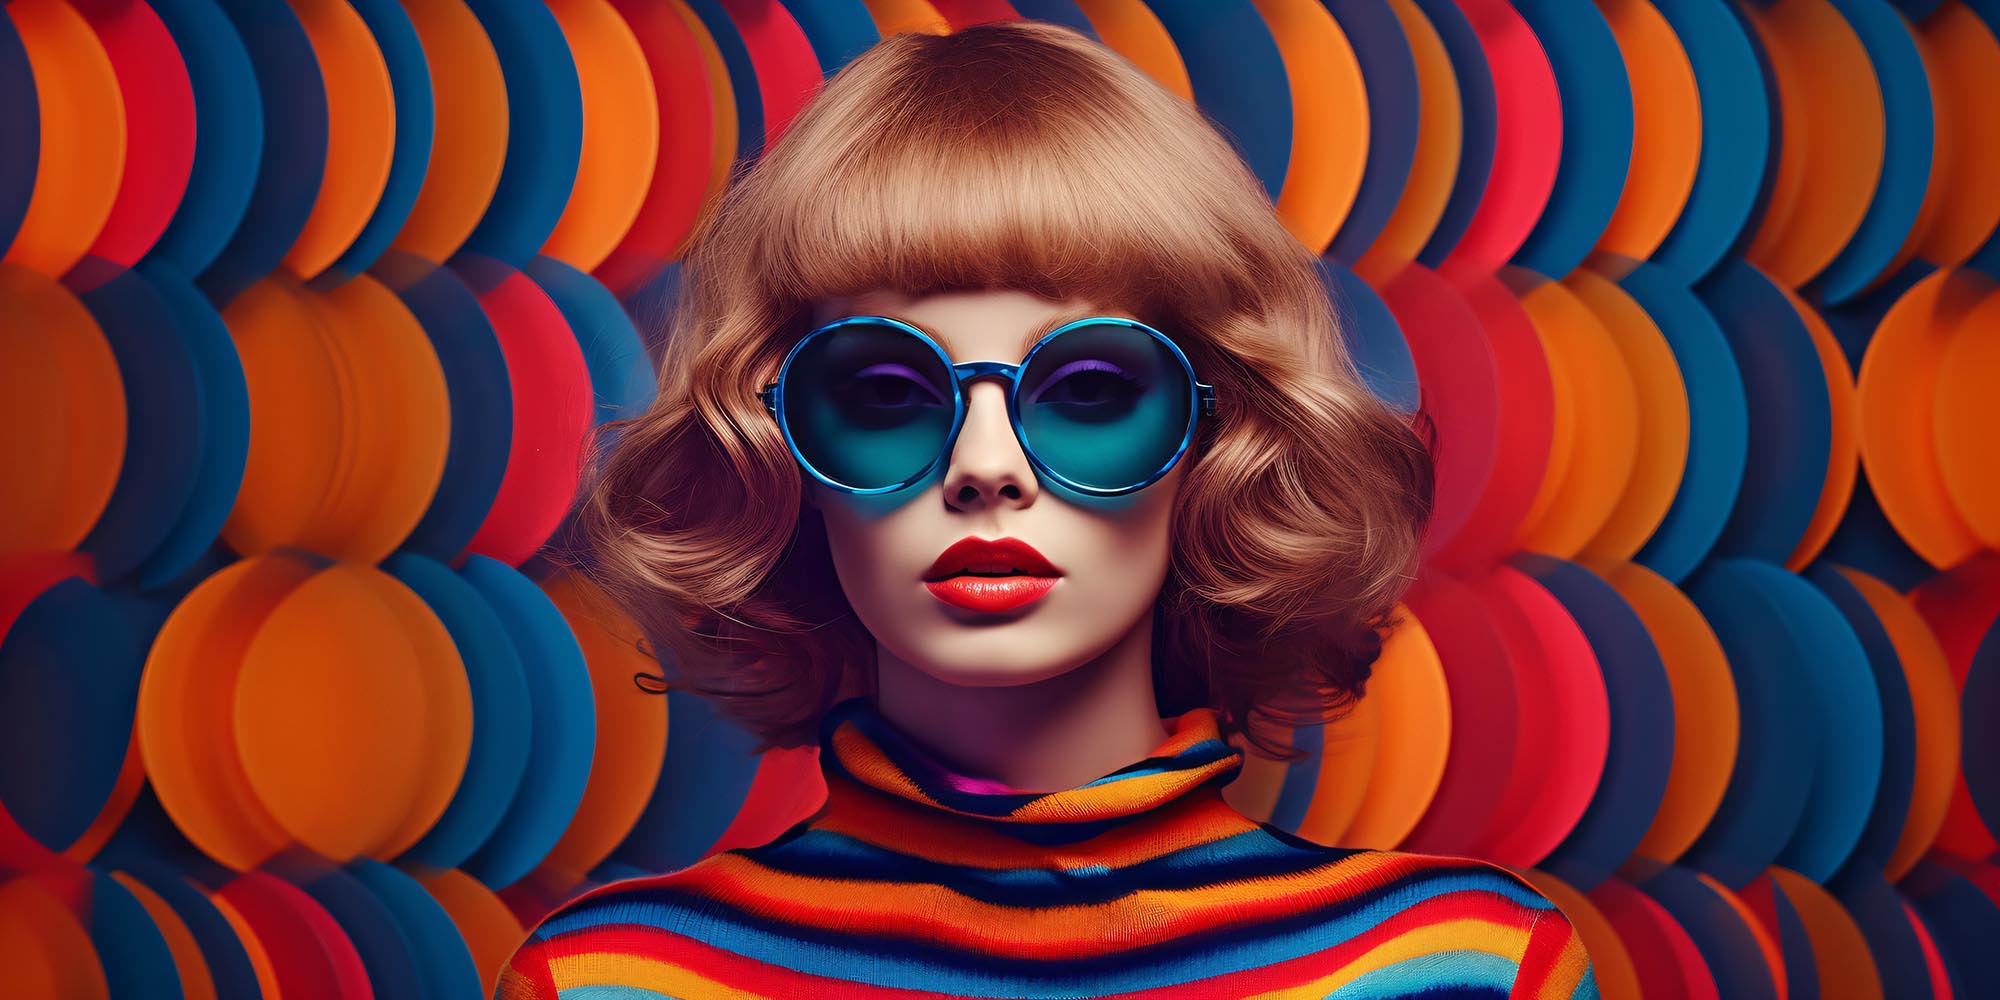 high fashion woman with round blue sunglasses in front of a multicolored abstract background